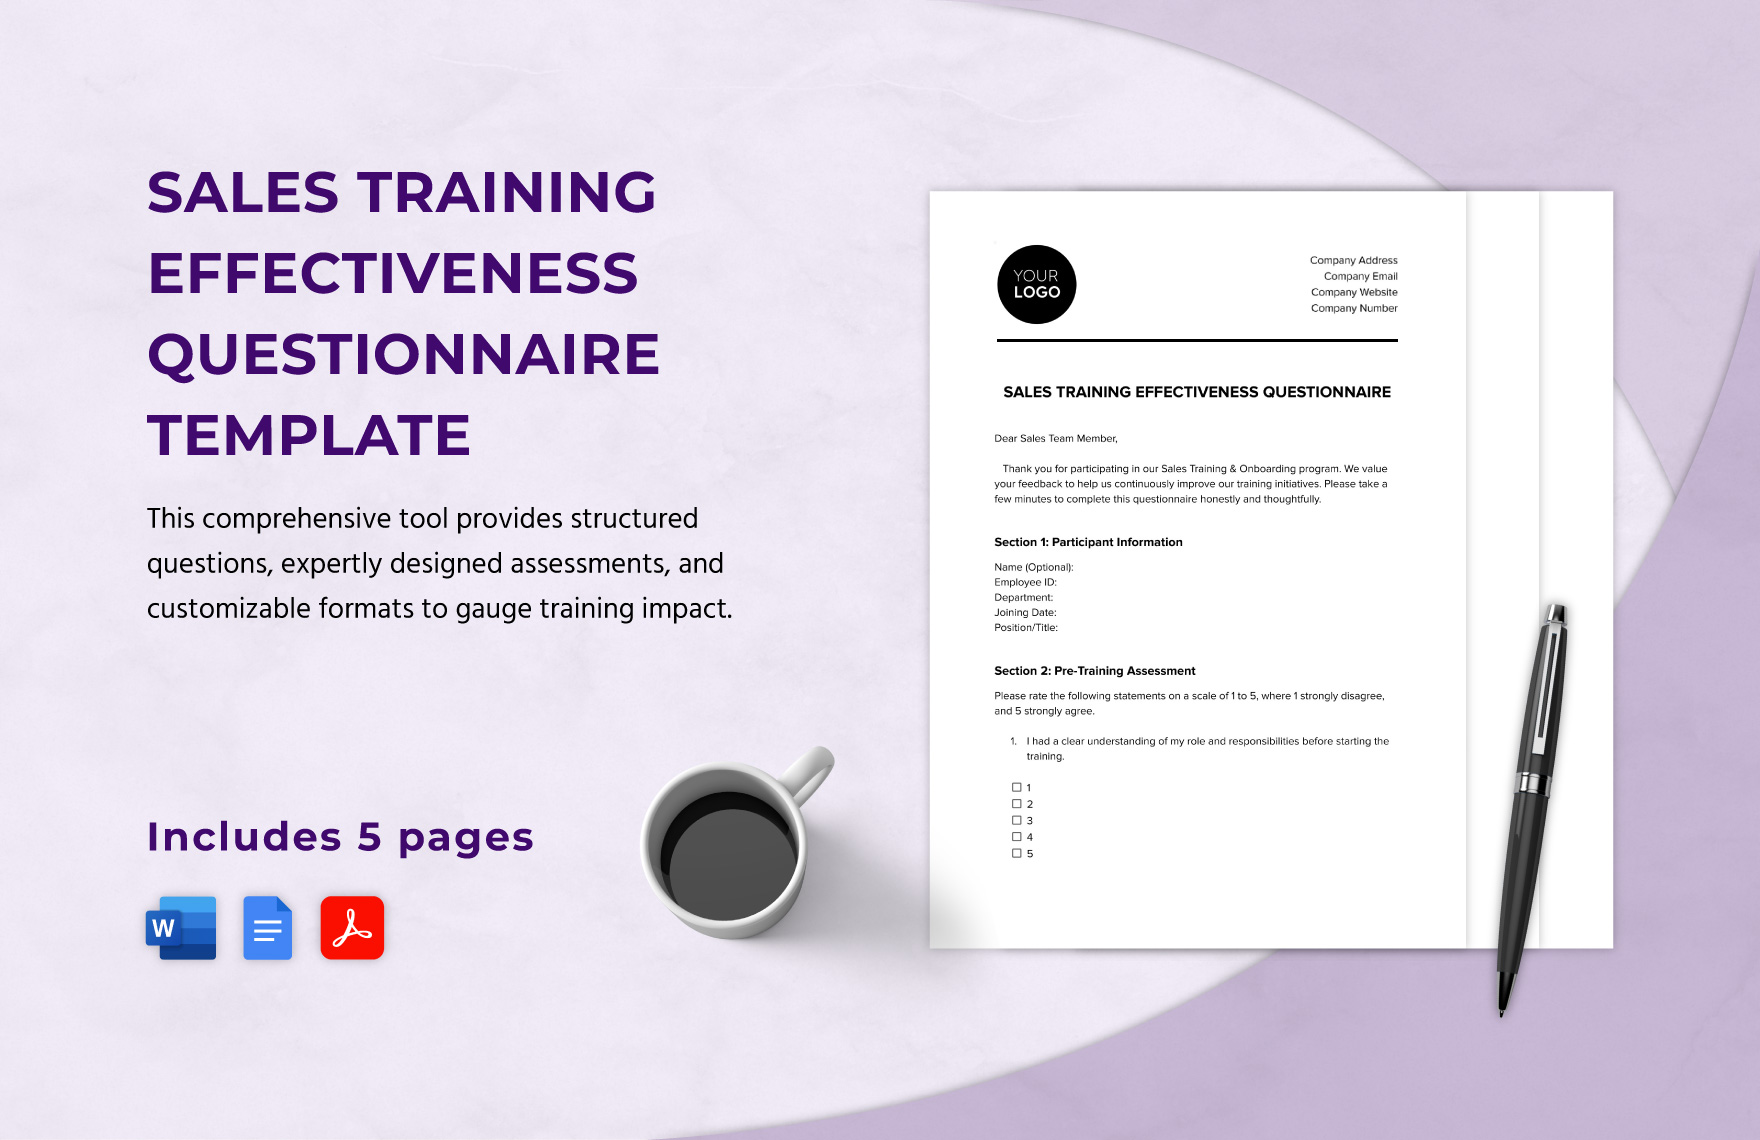 Sales Training Effectiveness Questionnaire Template in Word, Google Docs, PDF